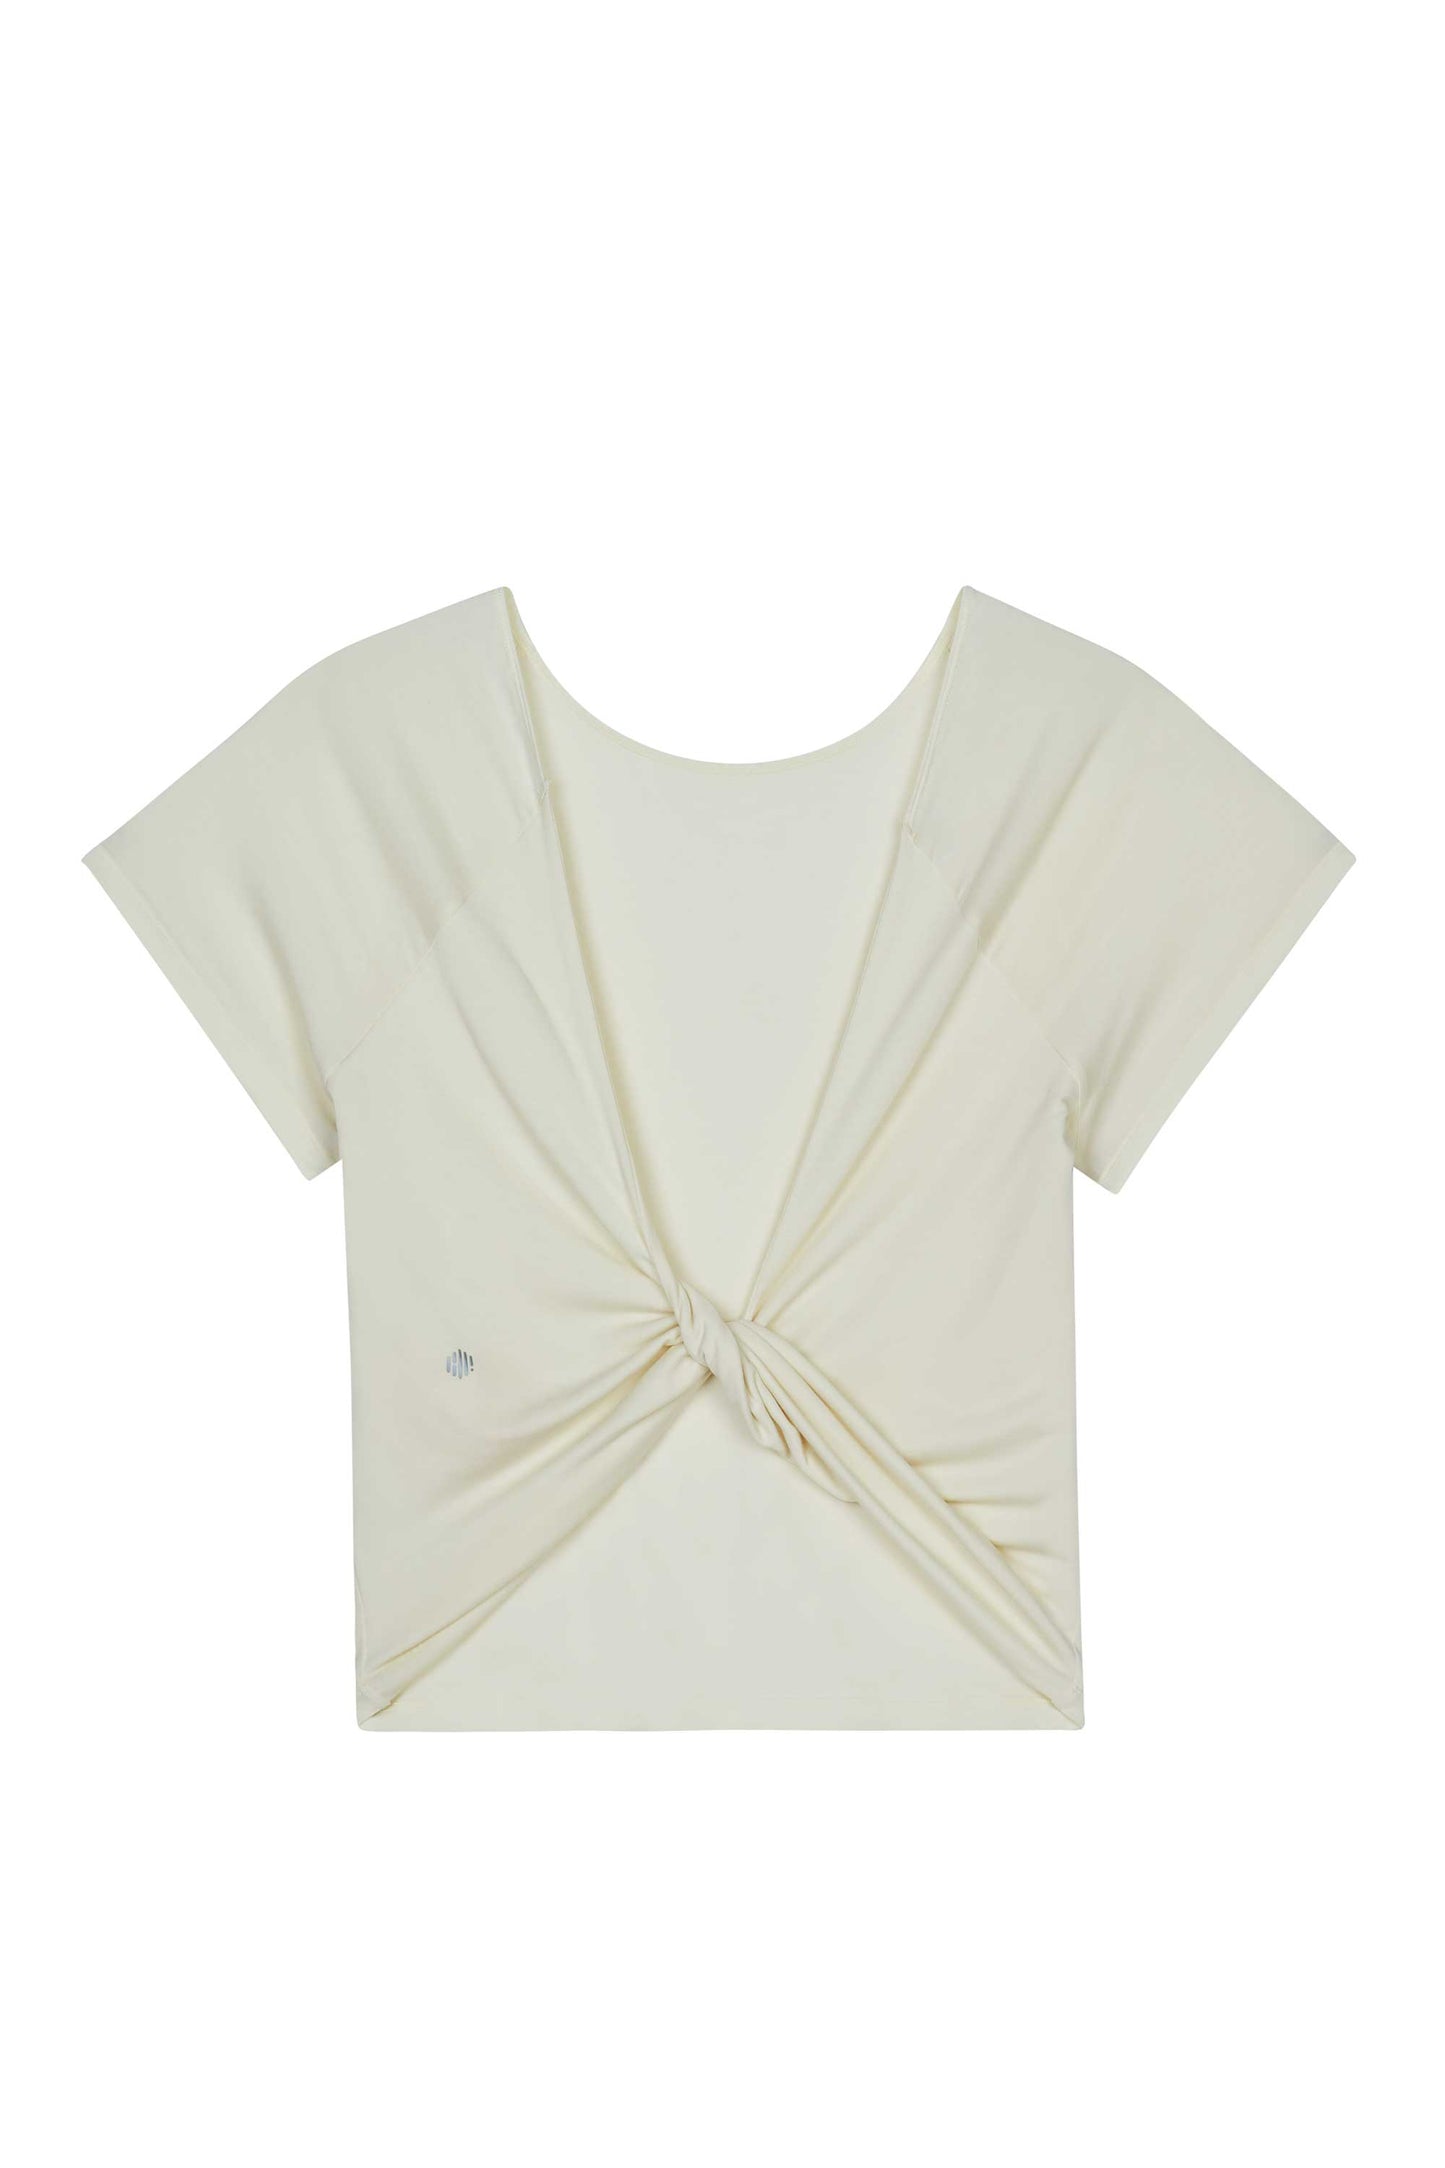 flay lay image of white t-shirt with front knot